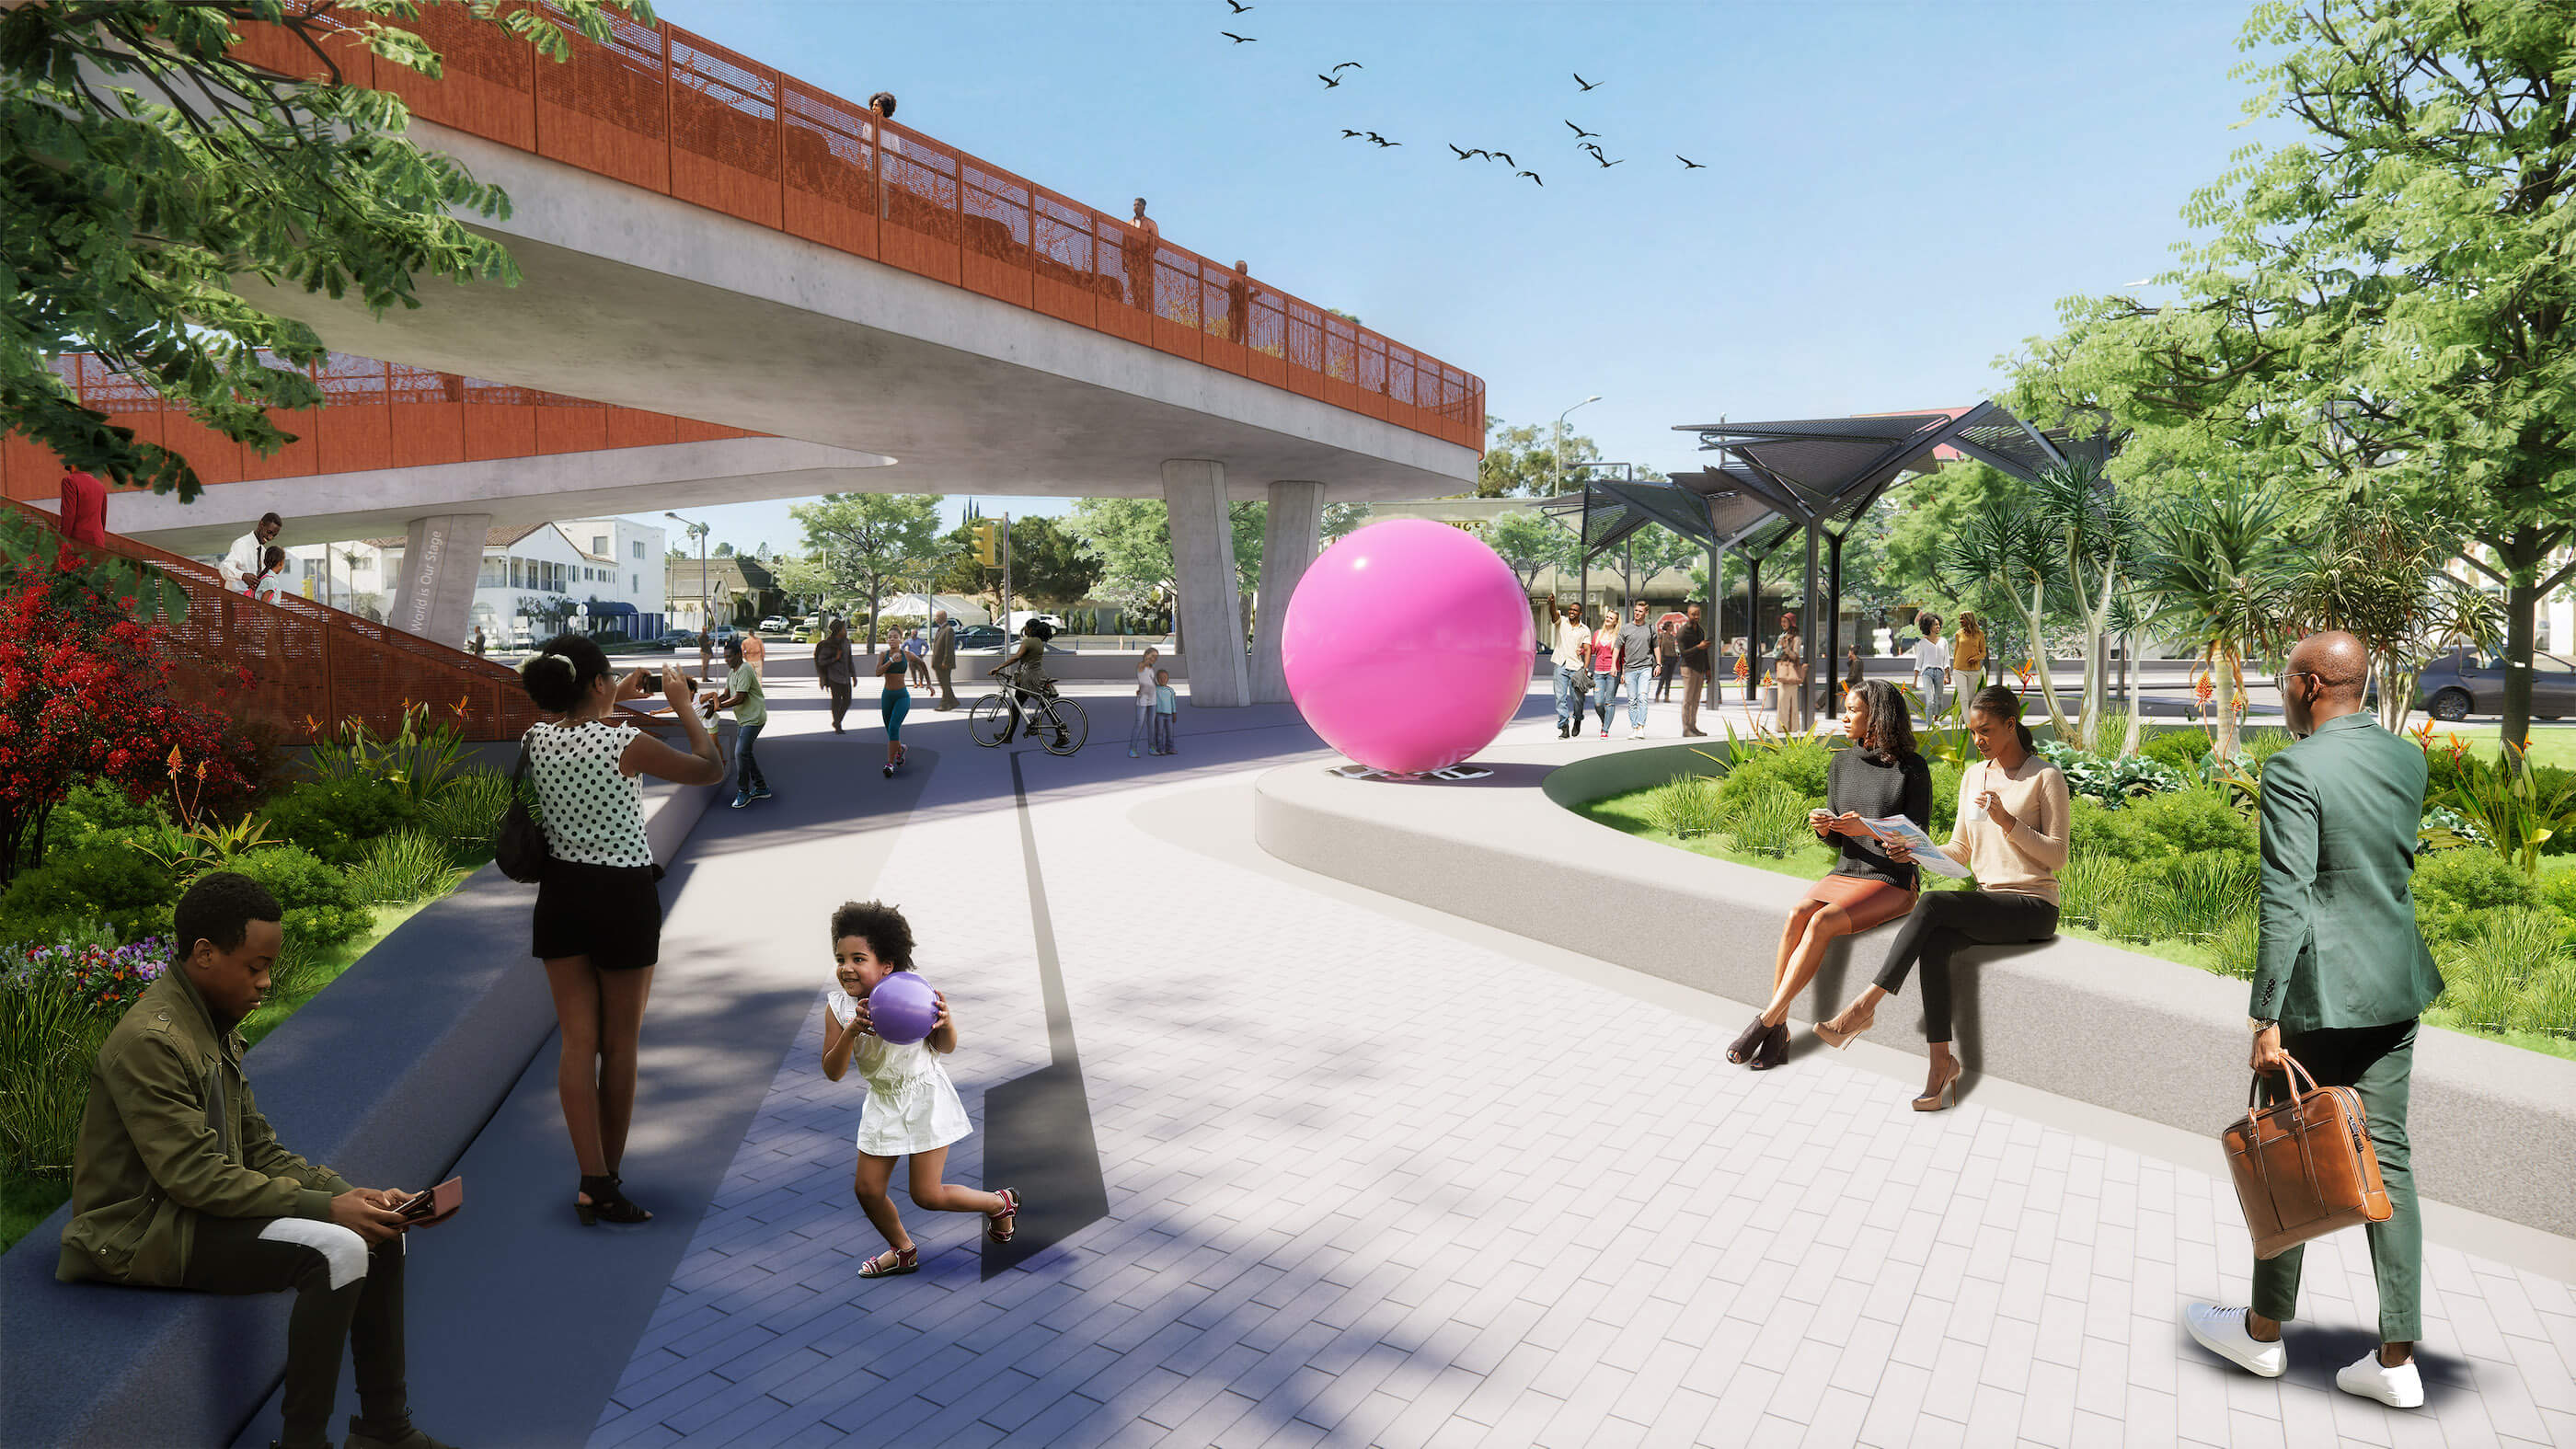 rendeirng of a park with a large pink orb installation at Destination Crenshaw,